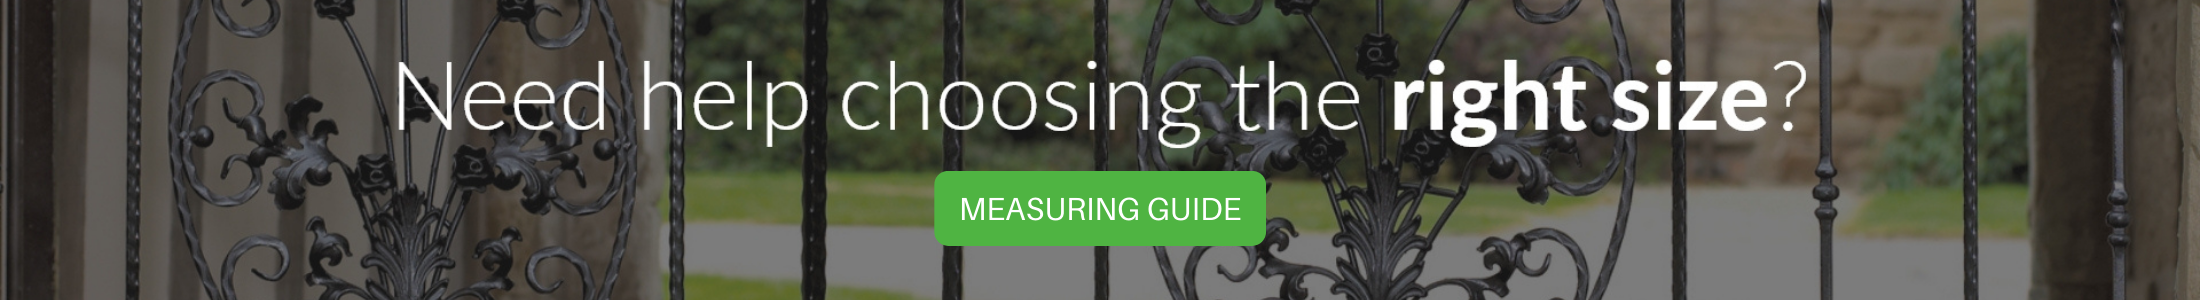 Read the measuring guide if you need help with ordering sizes